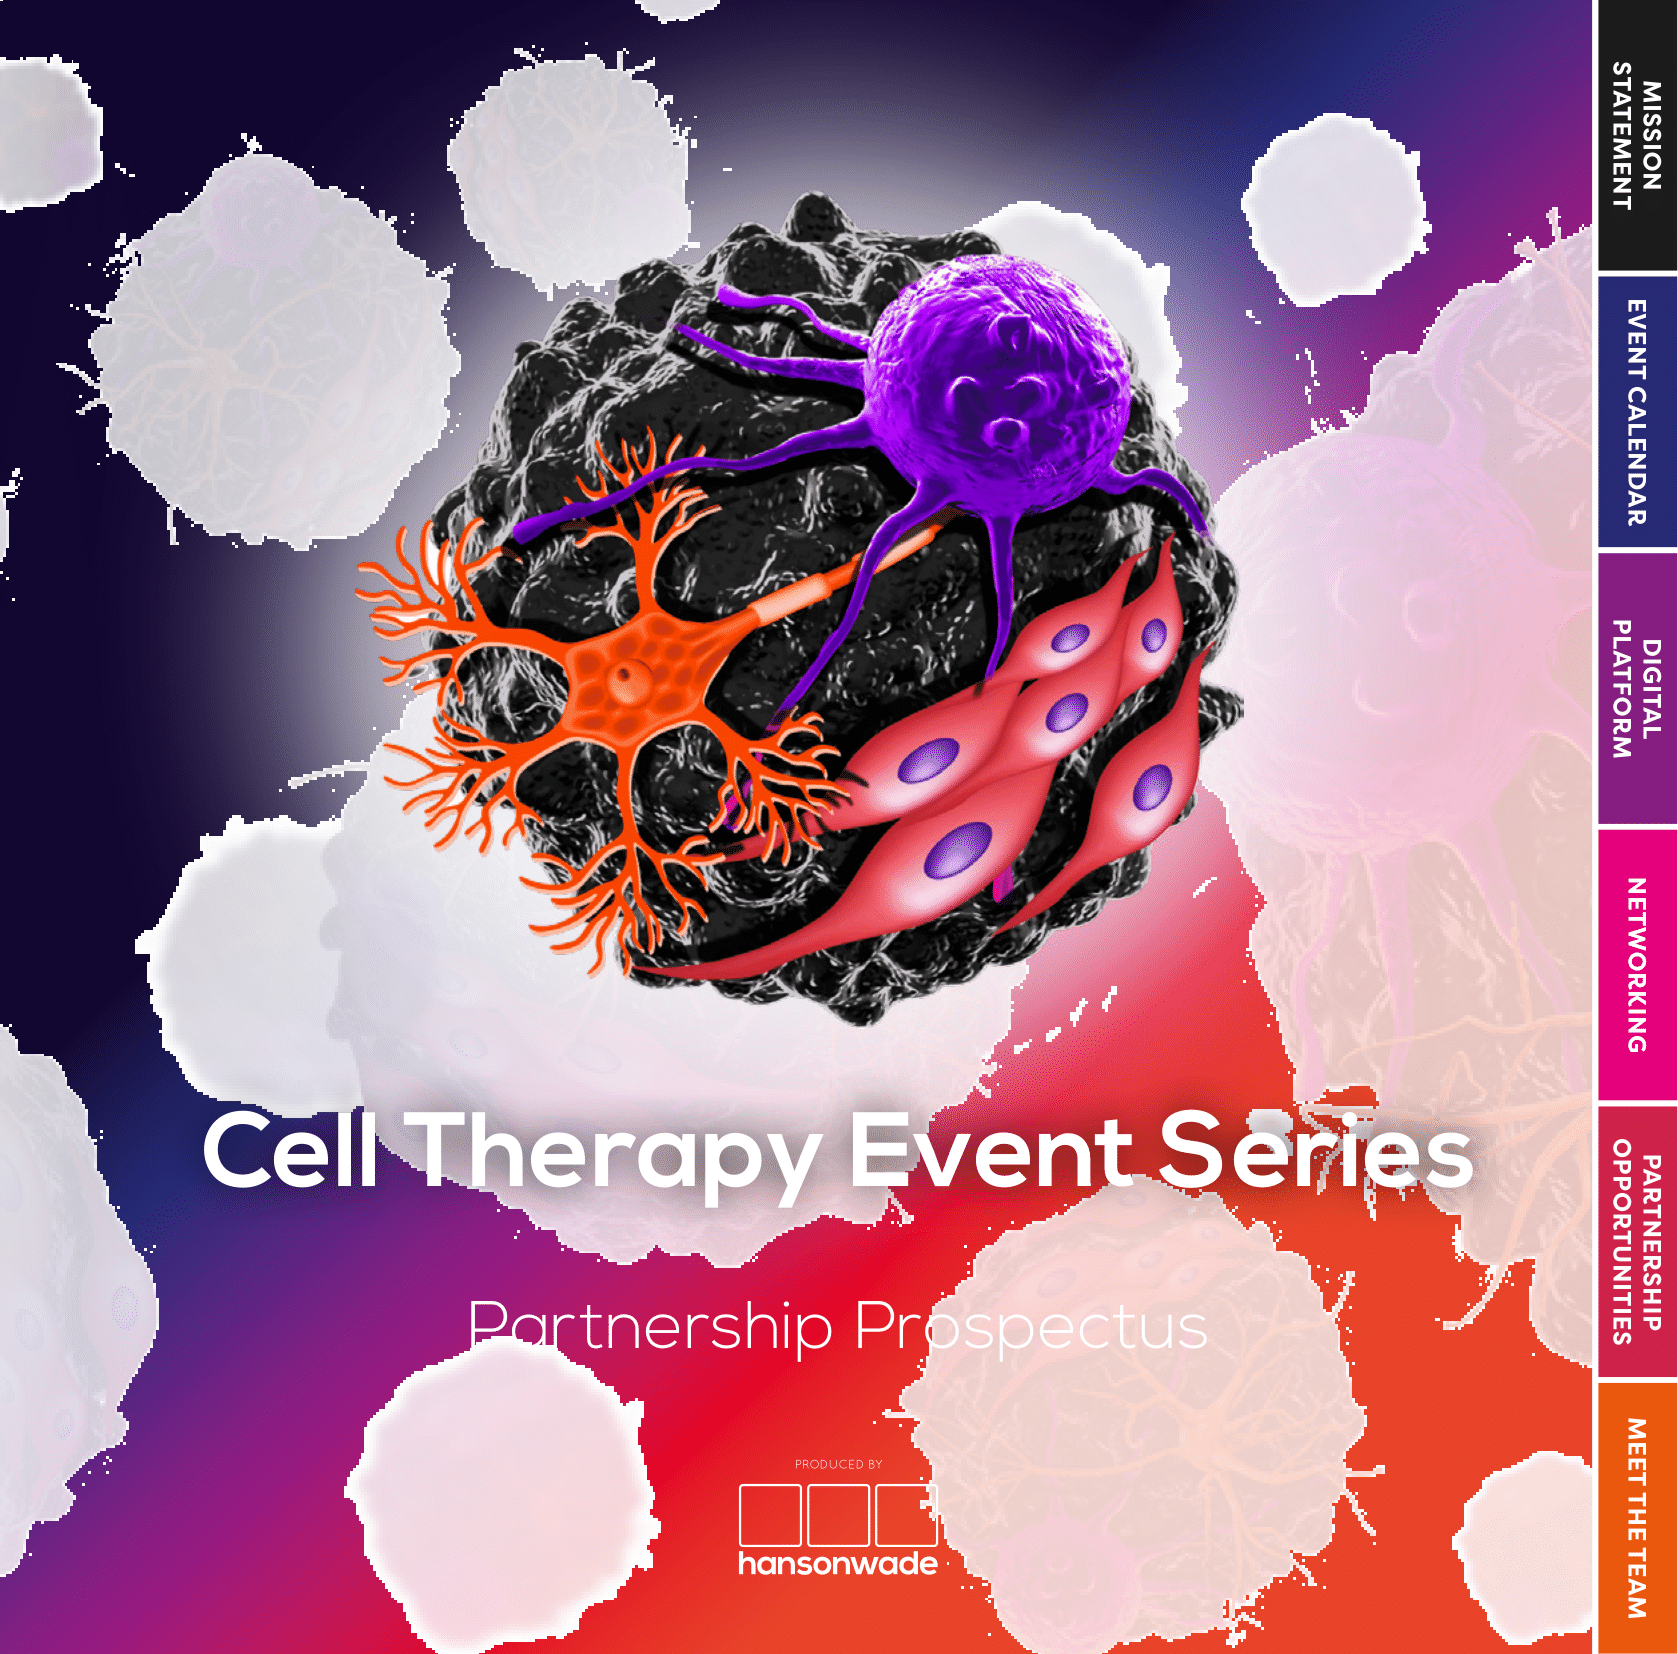 Cell Therapy Partner Prospectus-01